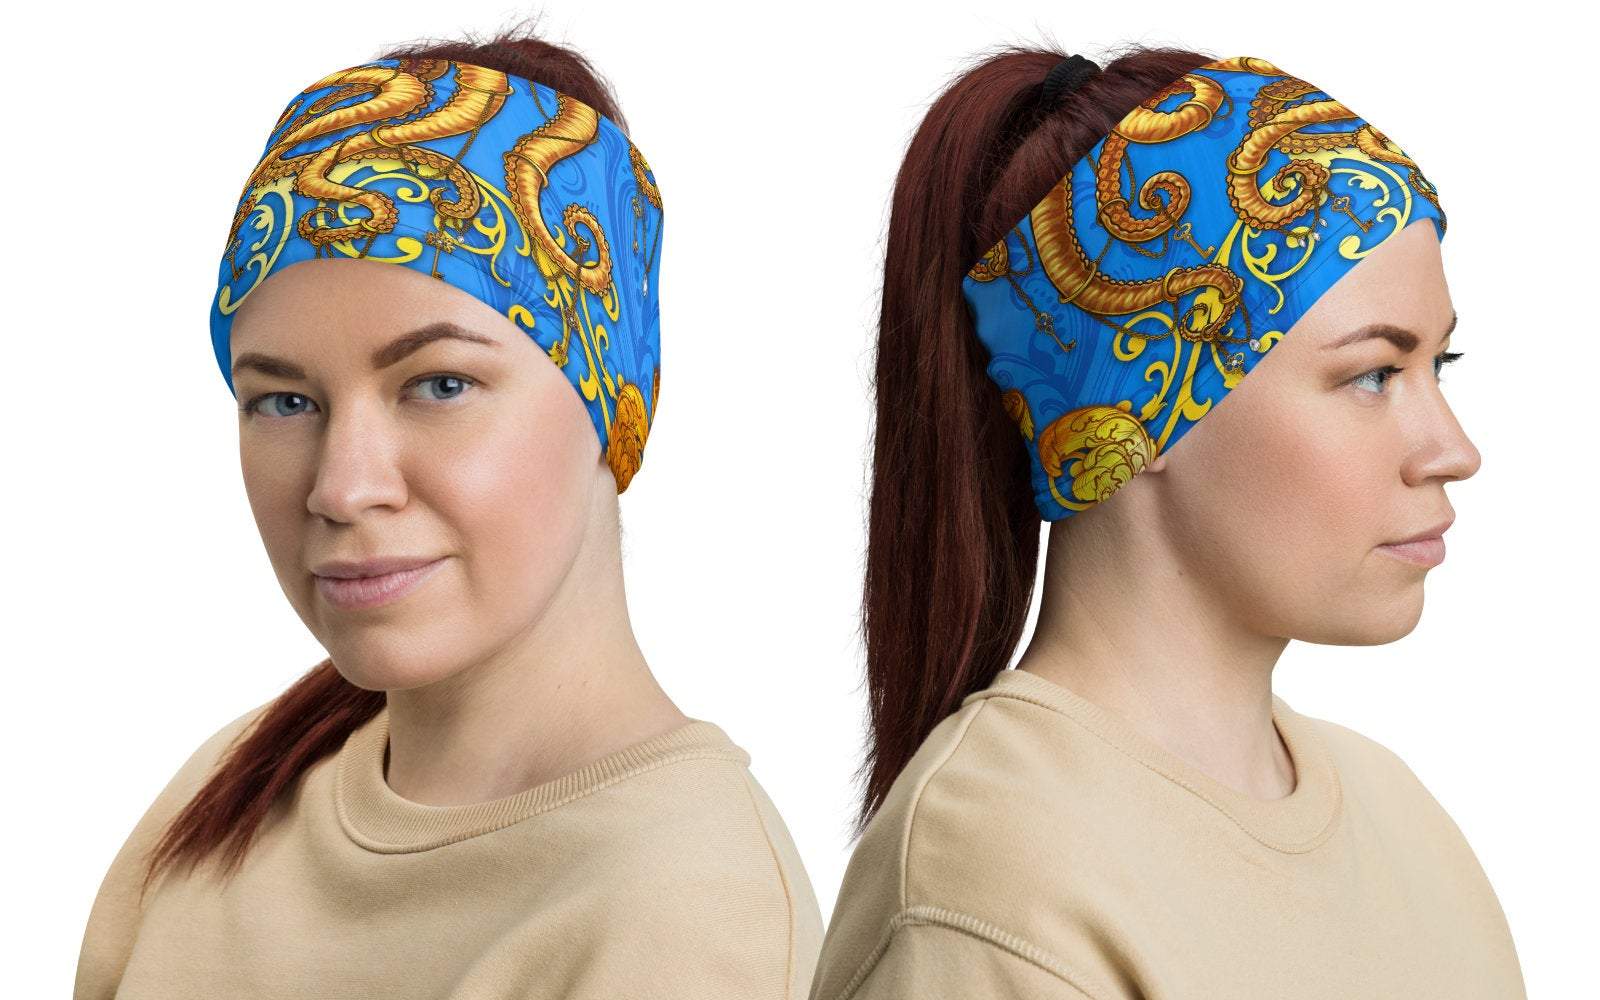 Octopus Neck Gaiter, Face Mask, Head Covering, Indie Outfit - Cyan & Gold - Abysm Internal